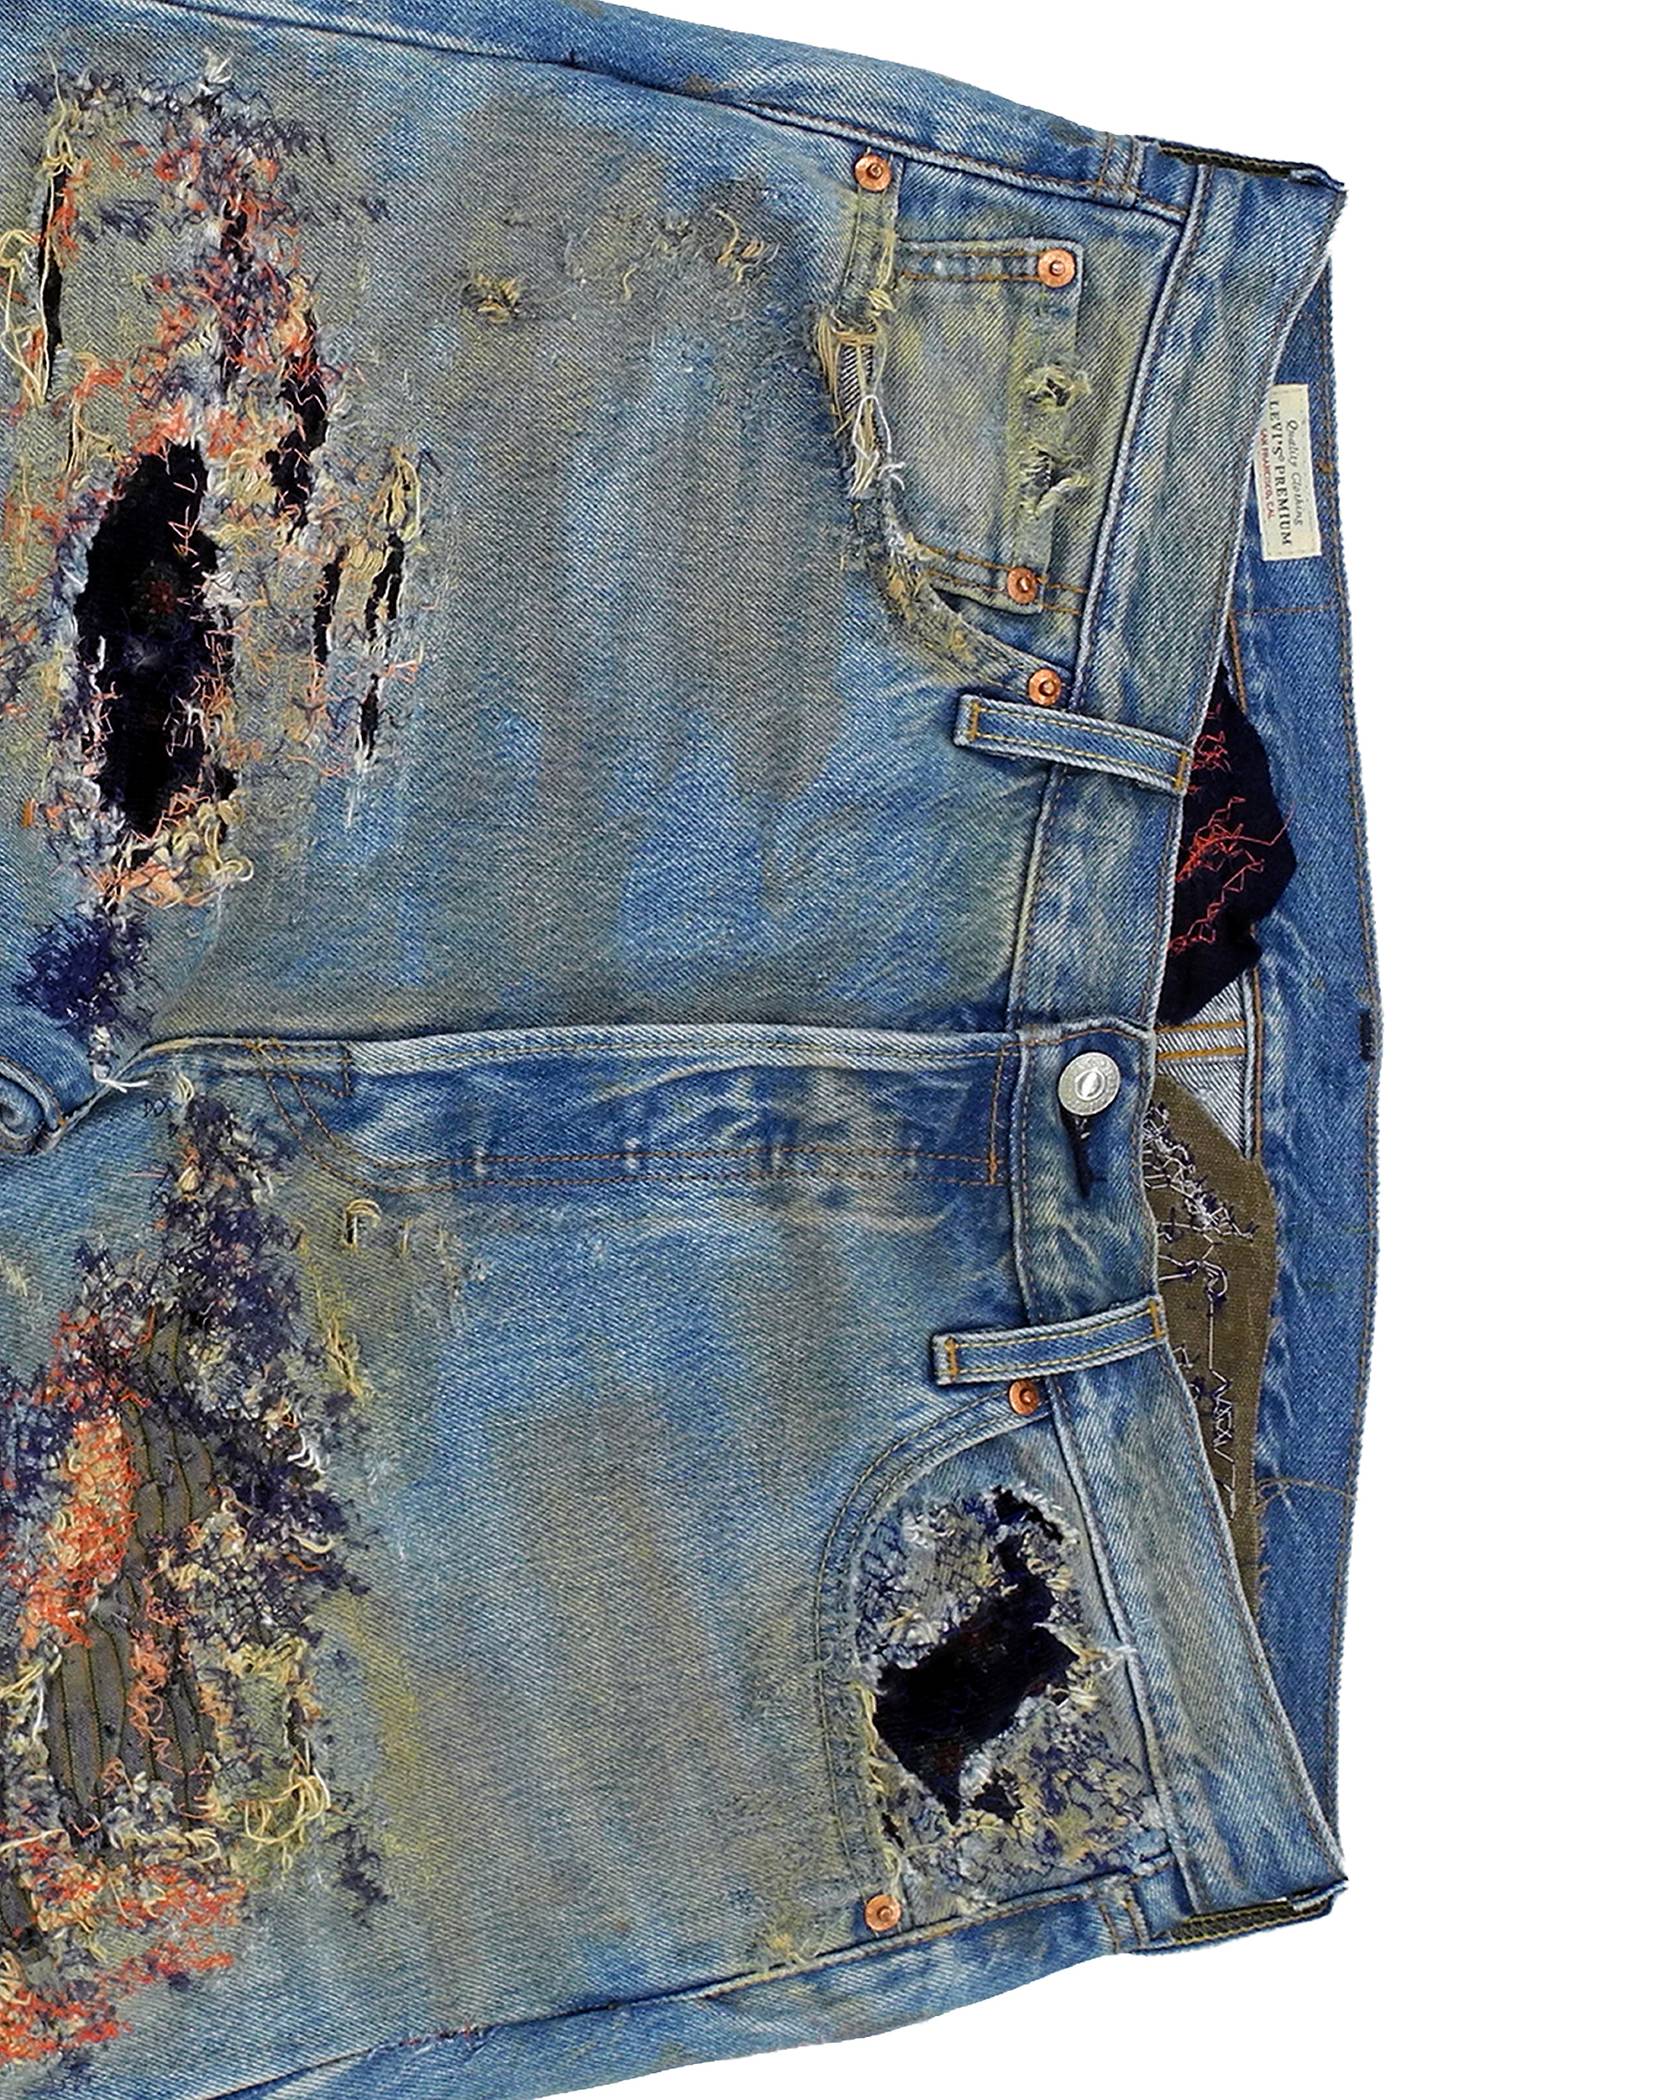 Phillip Leyesa close-up on the front waist zipper and buttons to the Levi's 501 Jeans after his customization process showing detailed distressed effect.